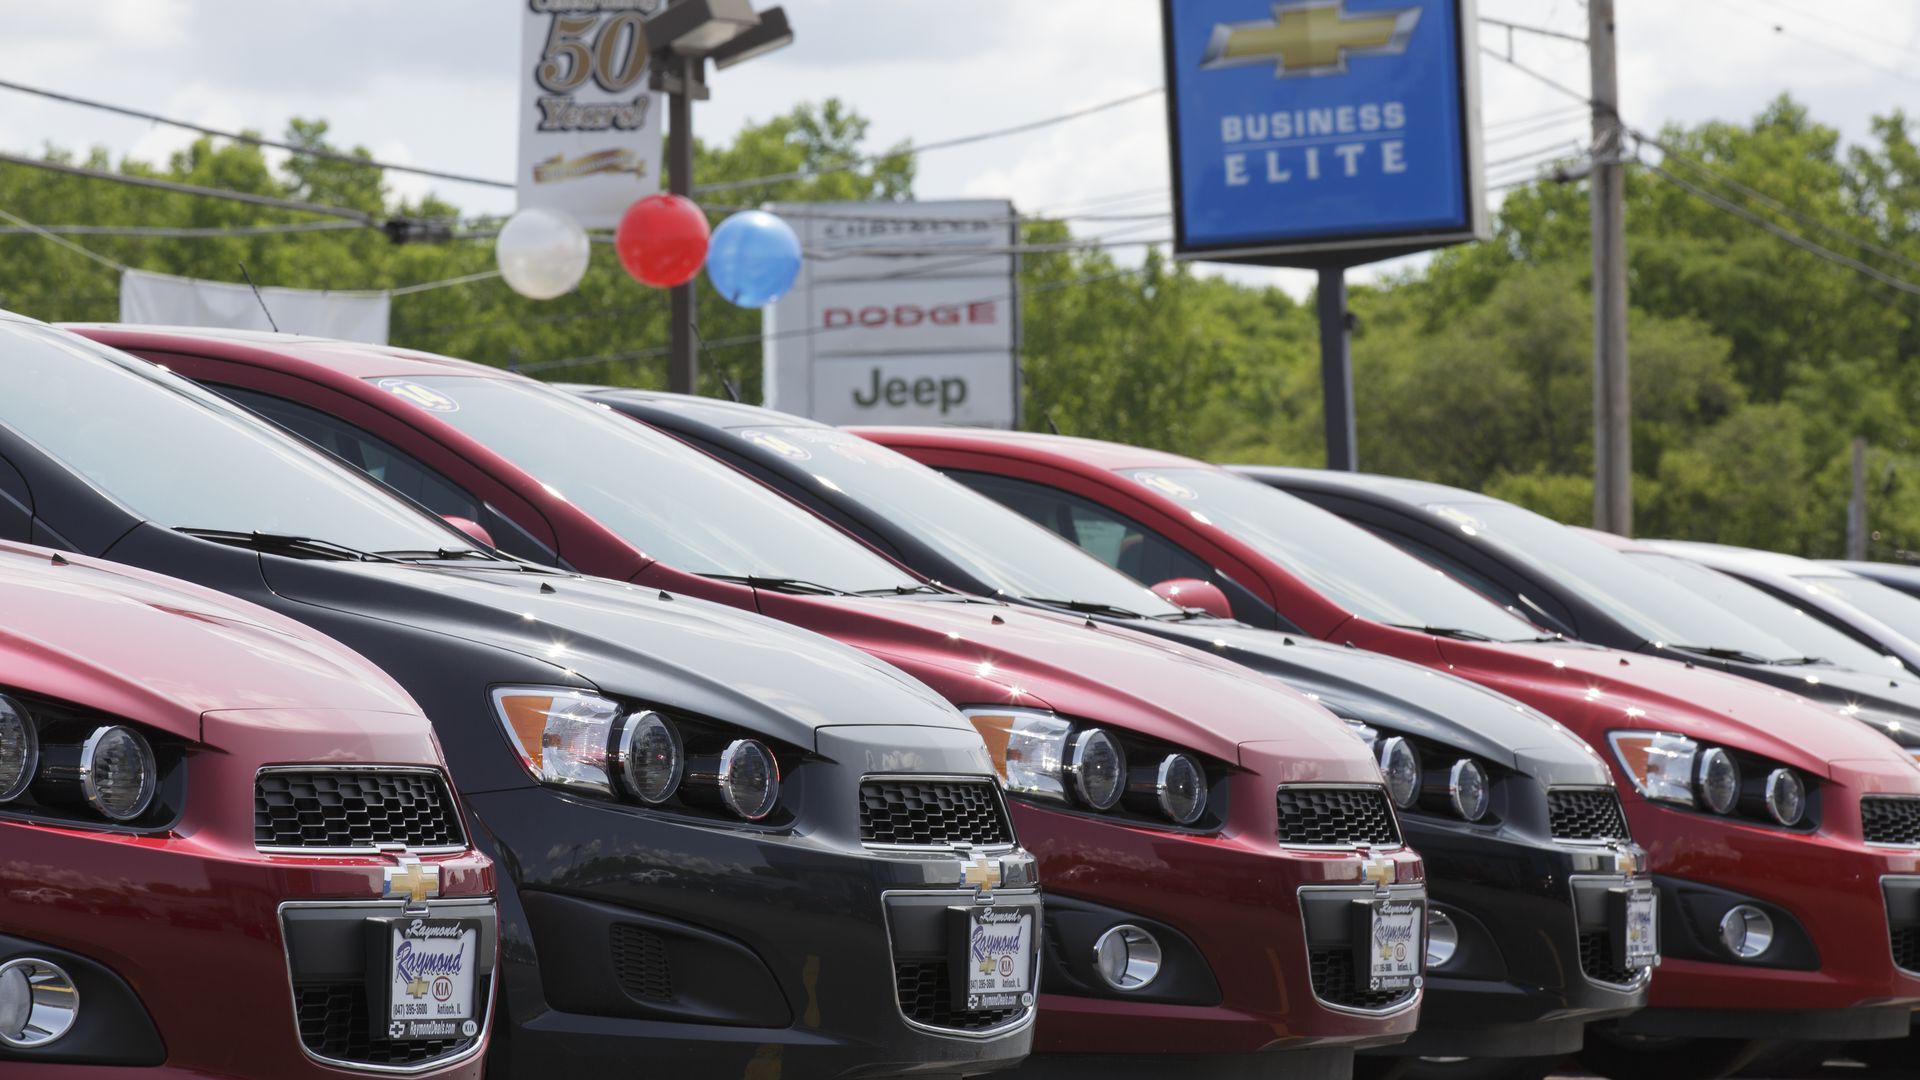 Image of cars lined up at Chevrolet dealership